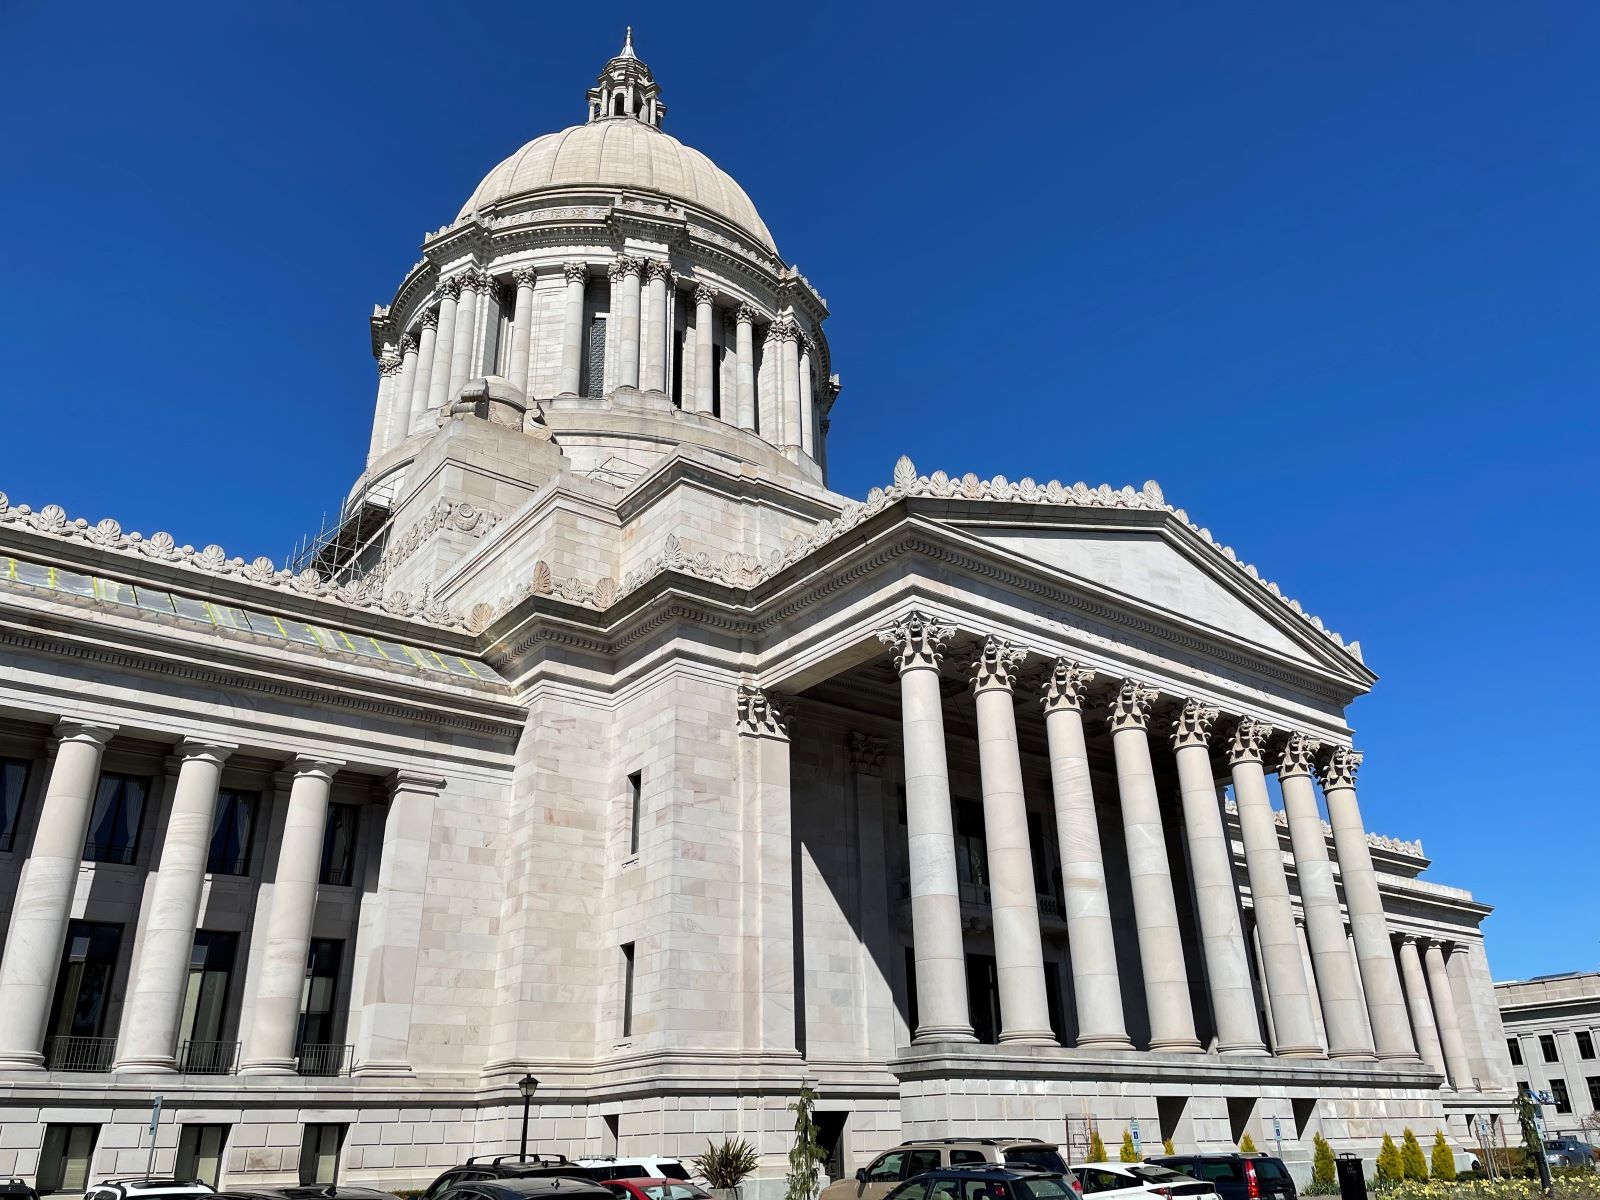 The Capitol building in Olympia is marble colored and include pillars and a dome in the classic style.